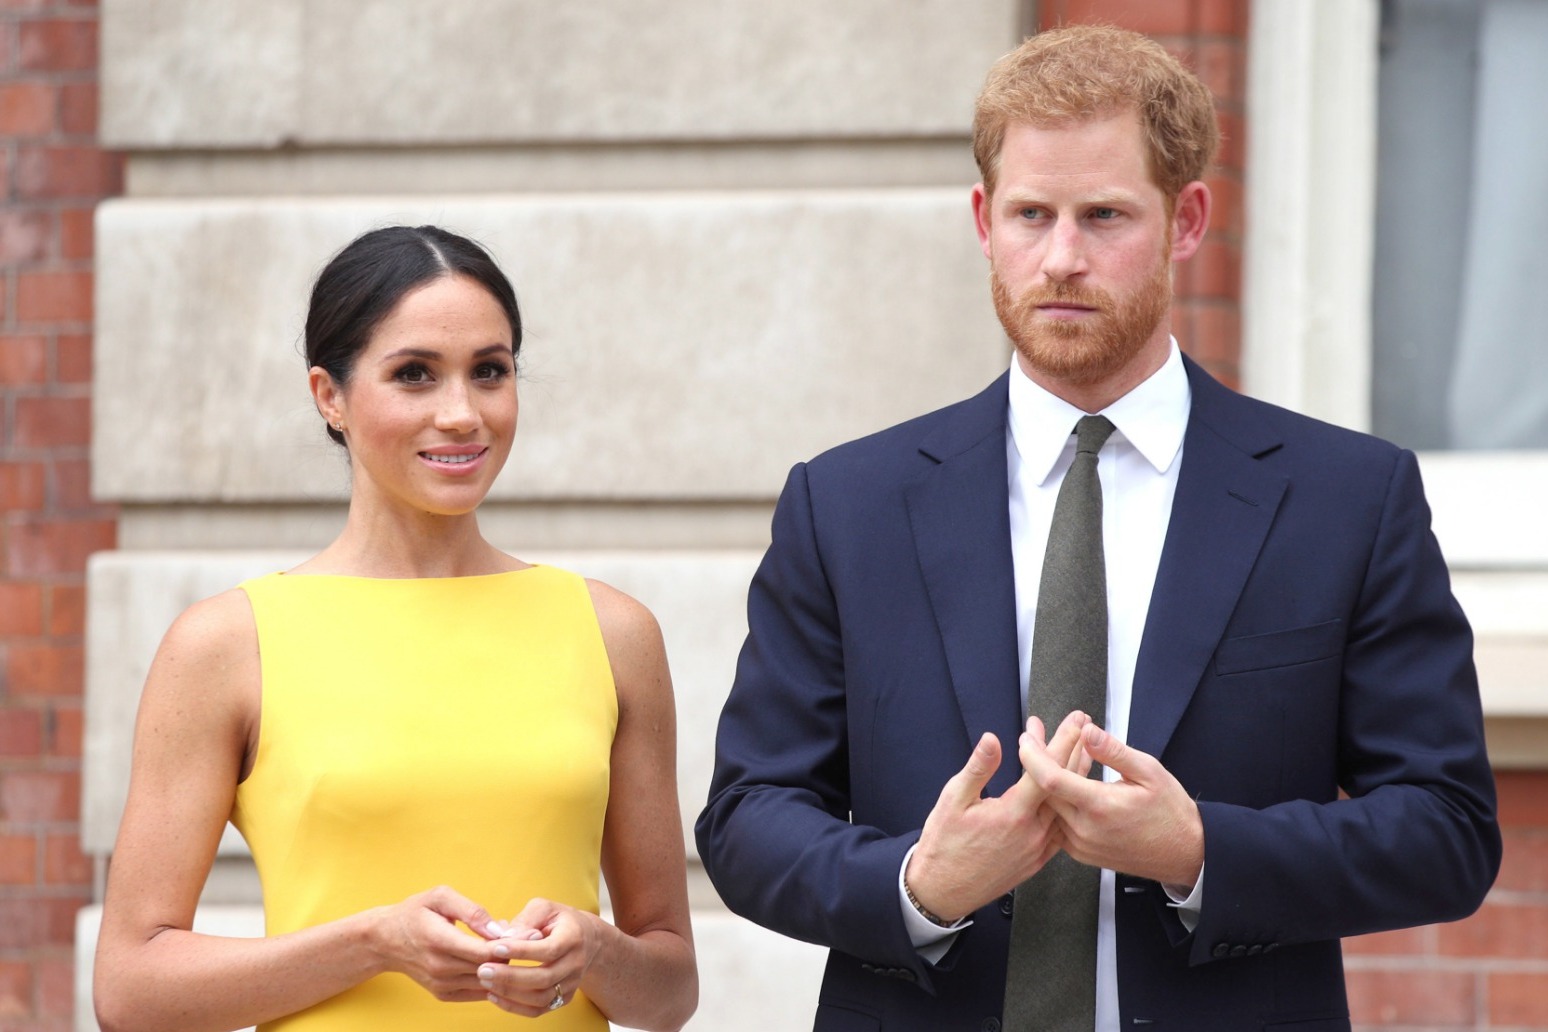 Harry and Meghan call for vaccine equity in New York speech 